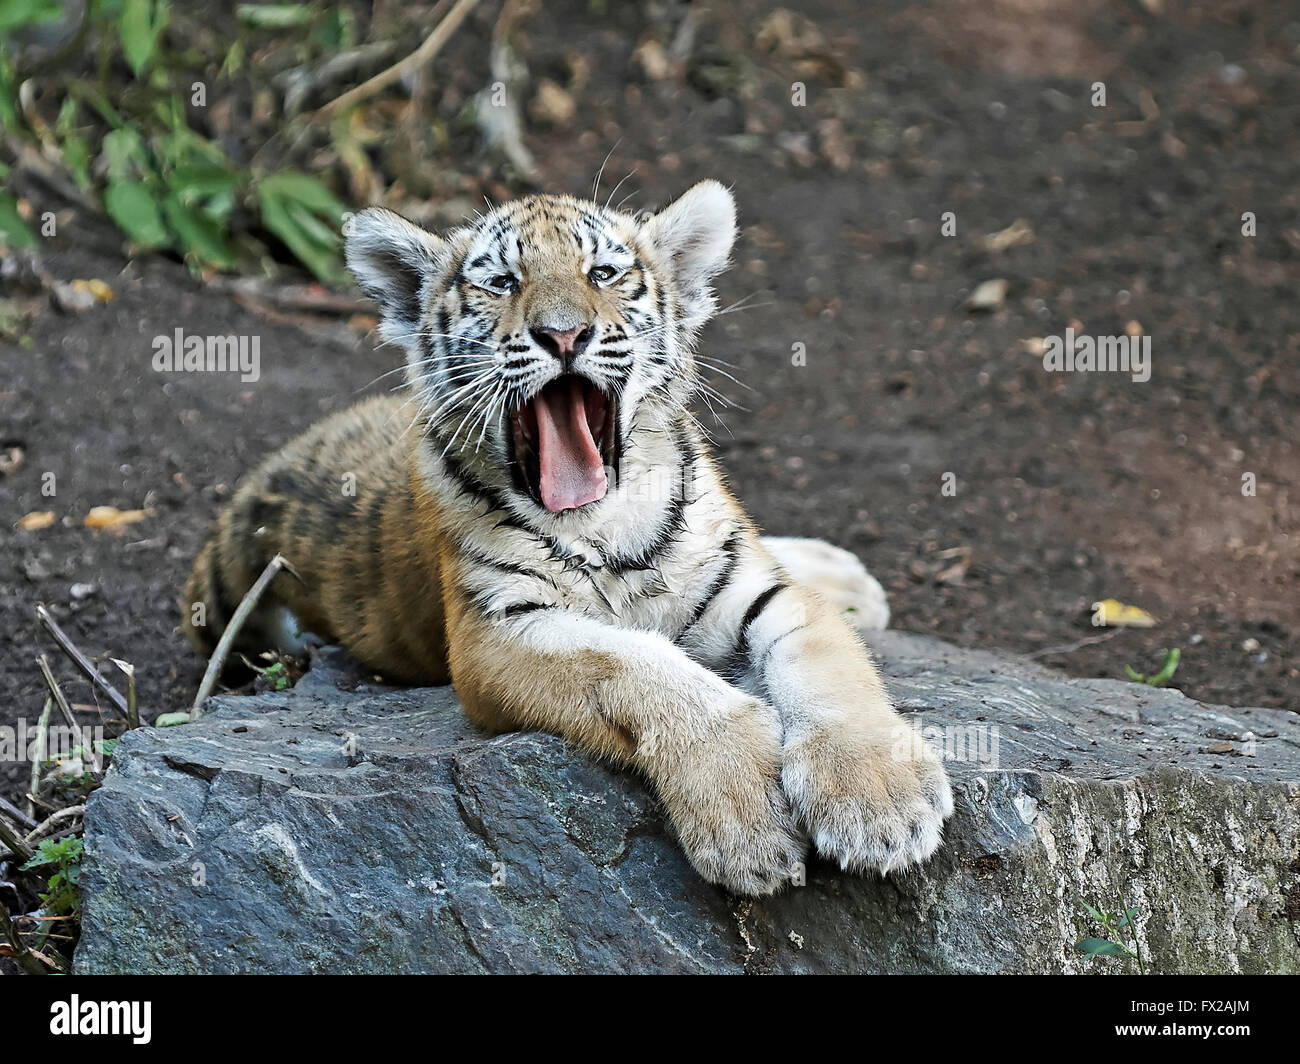 Cute and furry Amur Tiger cup in its natural habitat Stock Photo